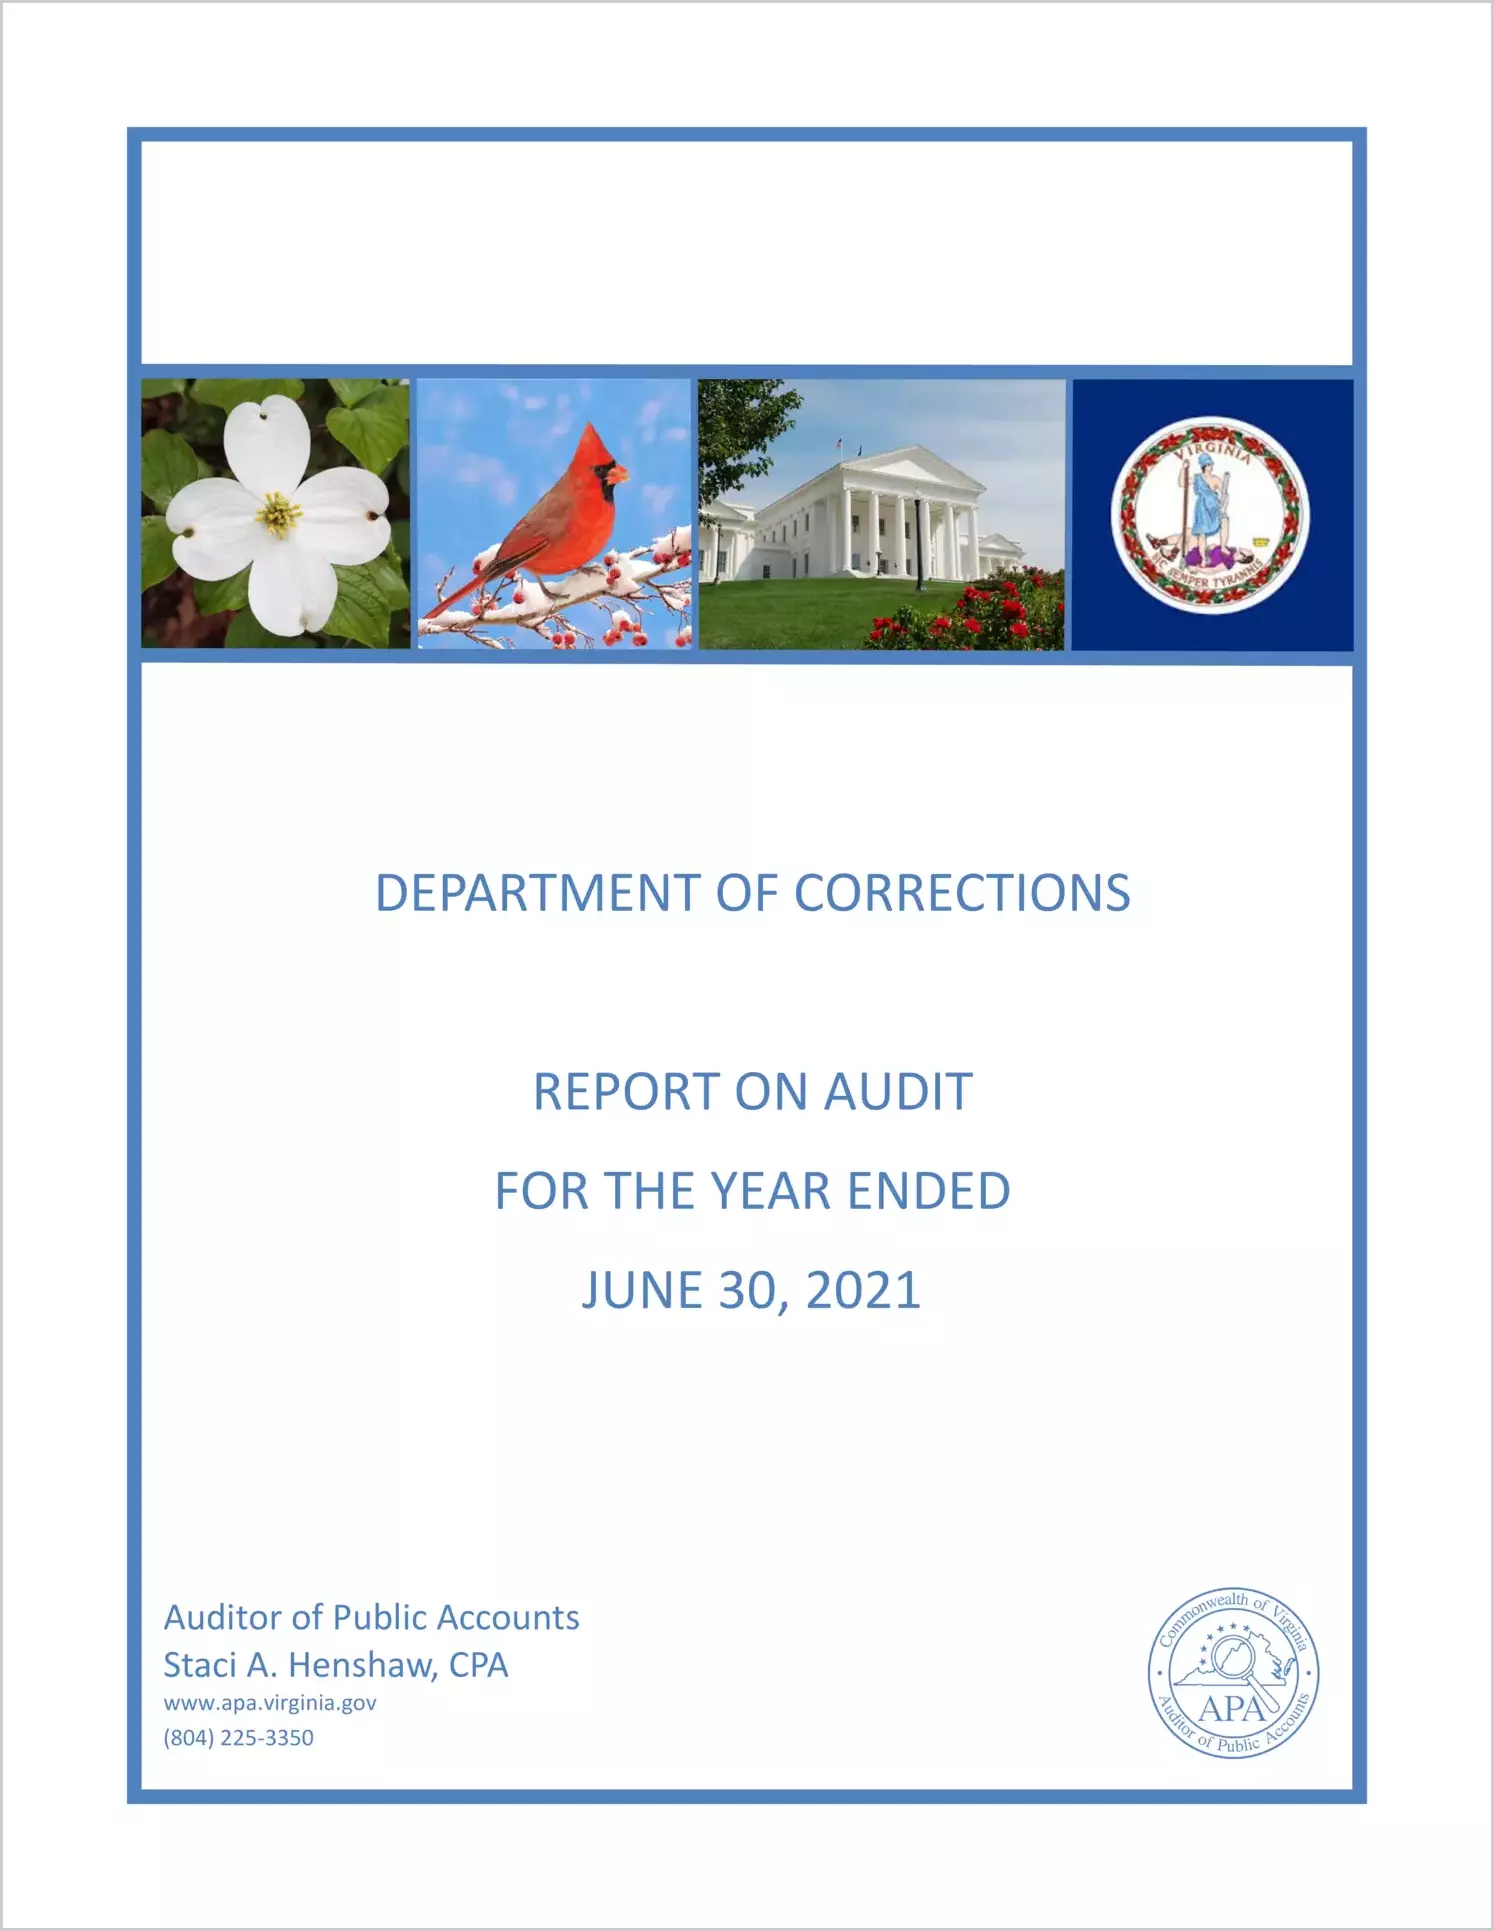 Department of Corrections for the year ended June 30, 2021